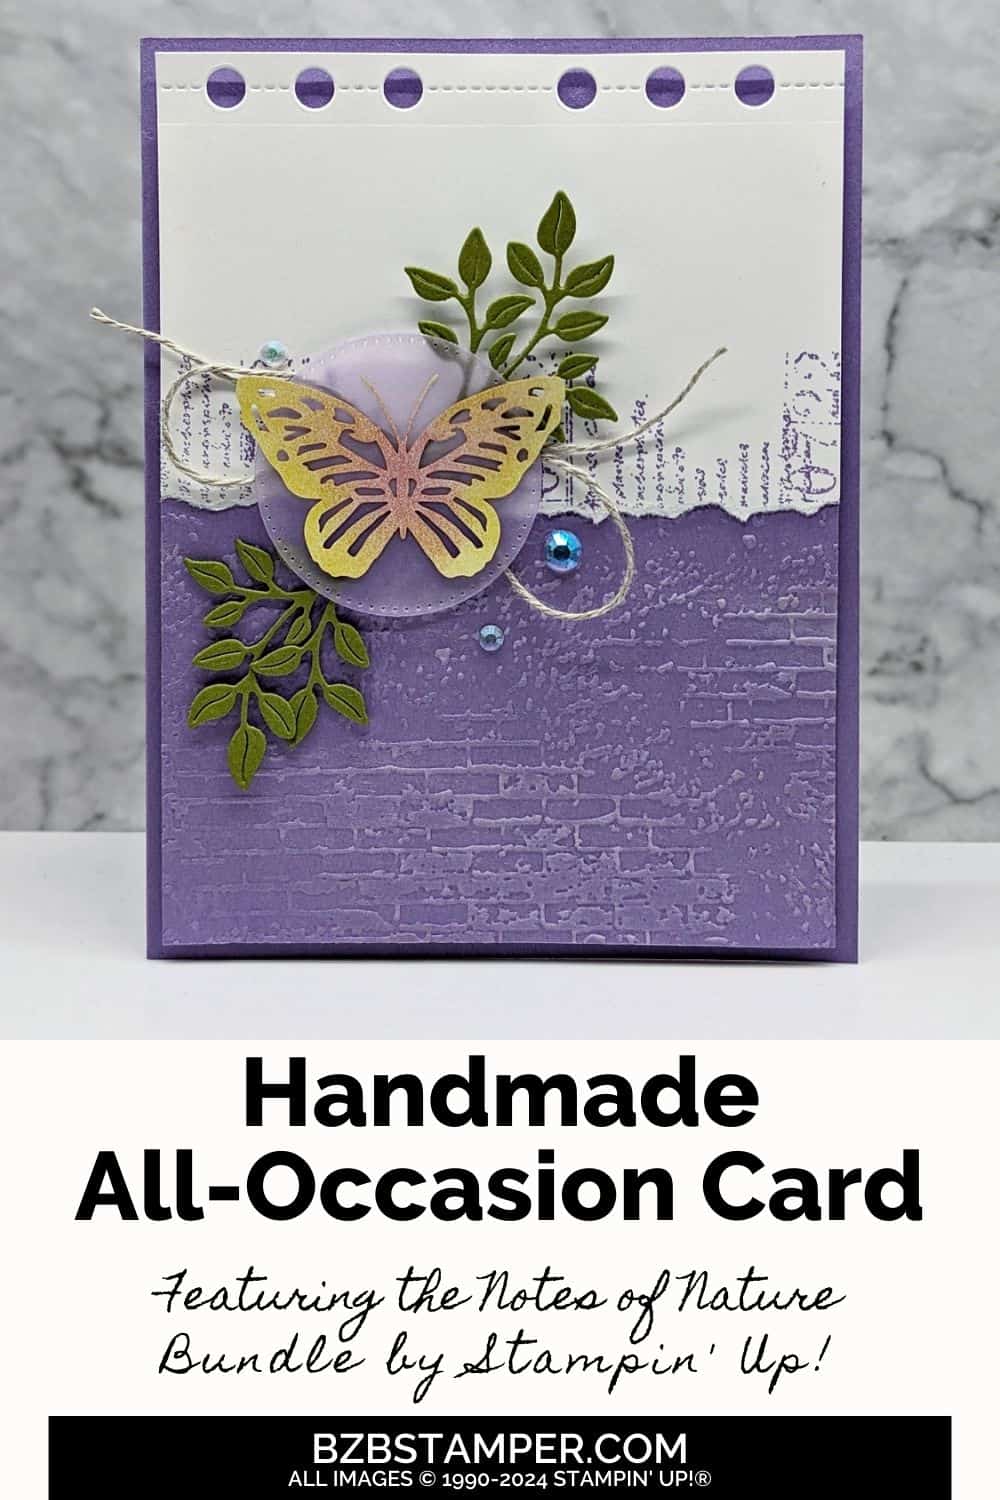 Butterfly Card with the Notes of Nature Bundle in purples, yellows and greens.  No sentiment on front of card.